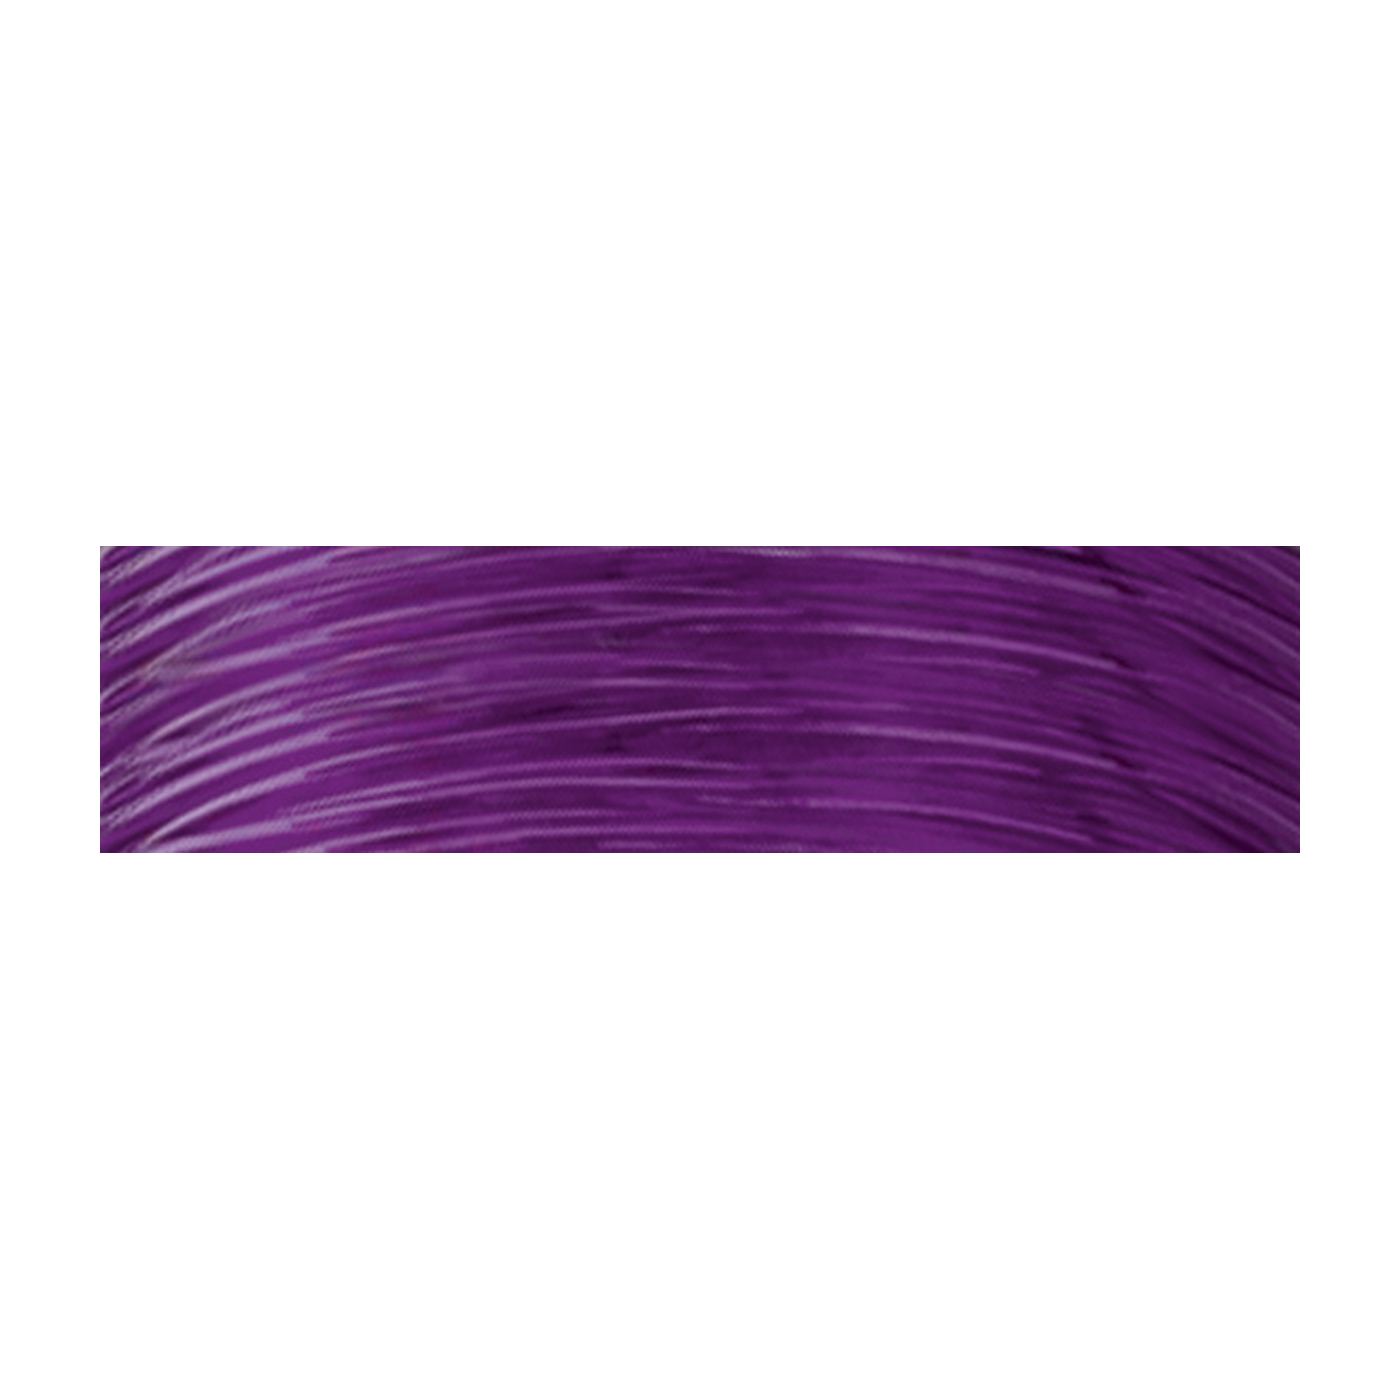 Griffin Jewelry Elastic Cord Bindfaden, lila, ø 0,5 mm - 25 m